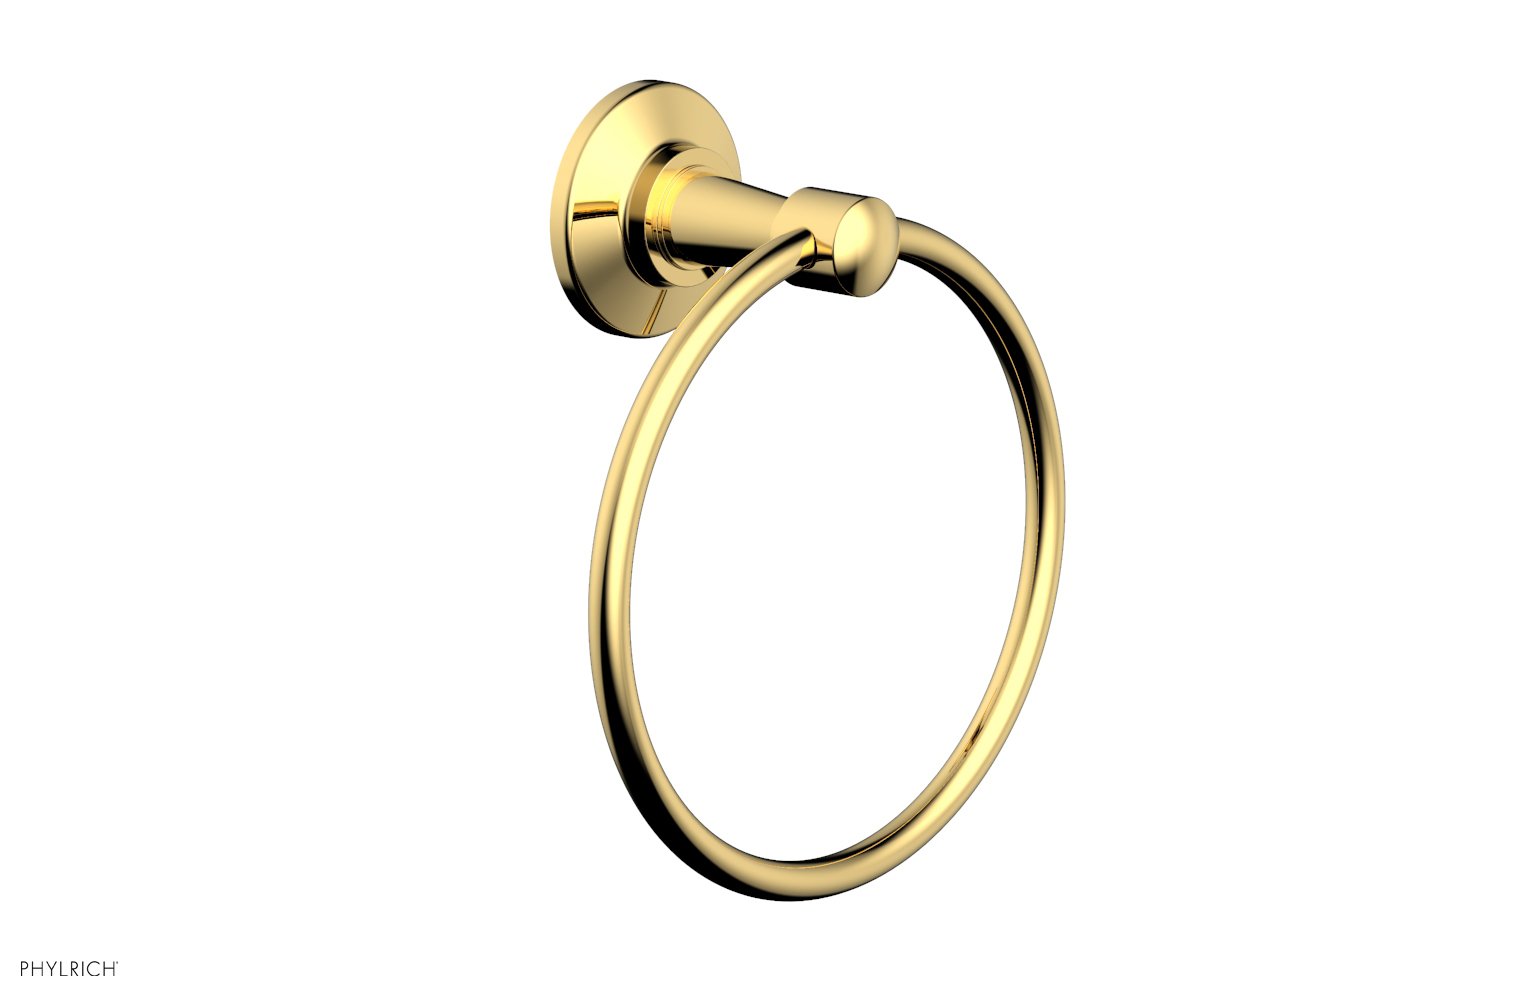 Phylrich WORKS Towel Ring